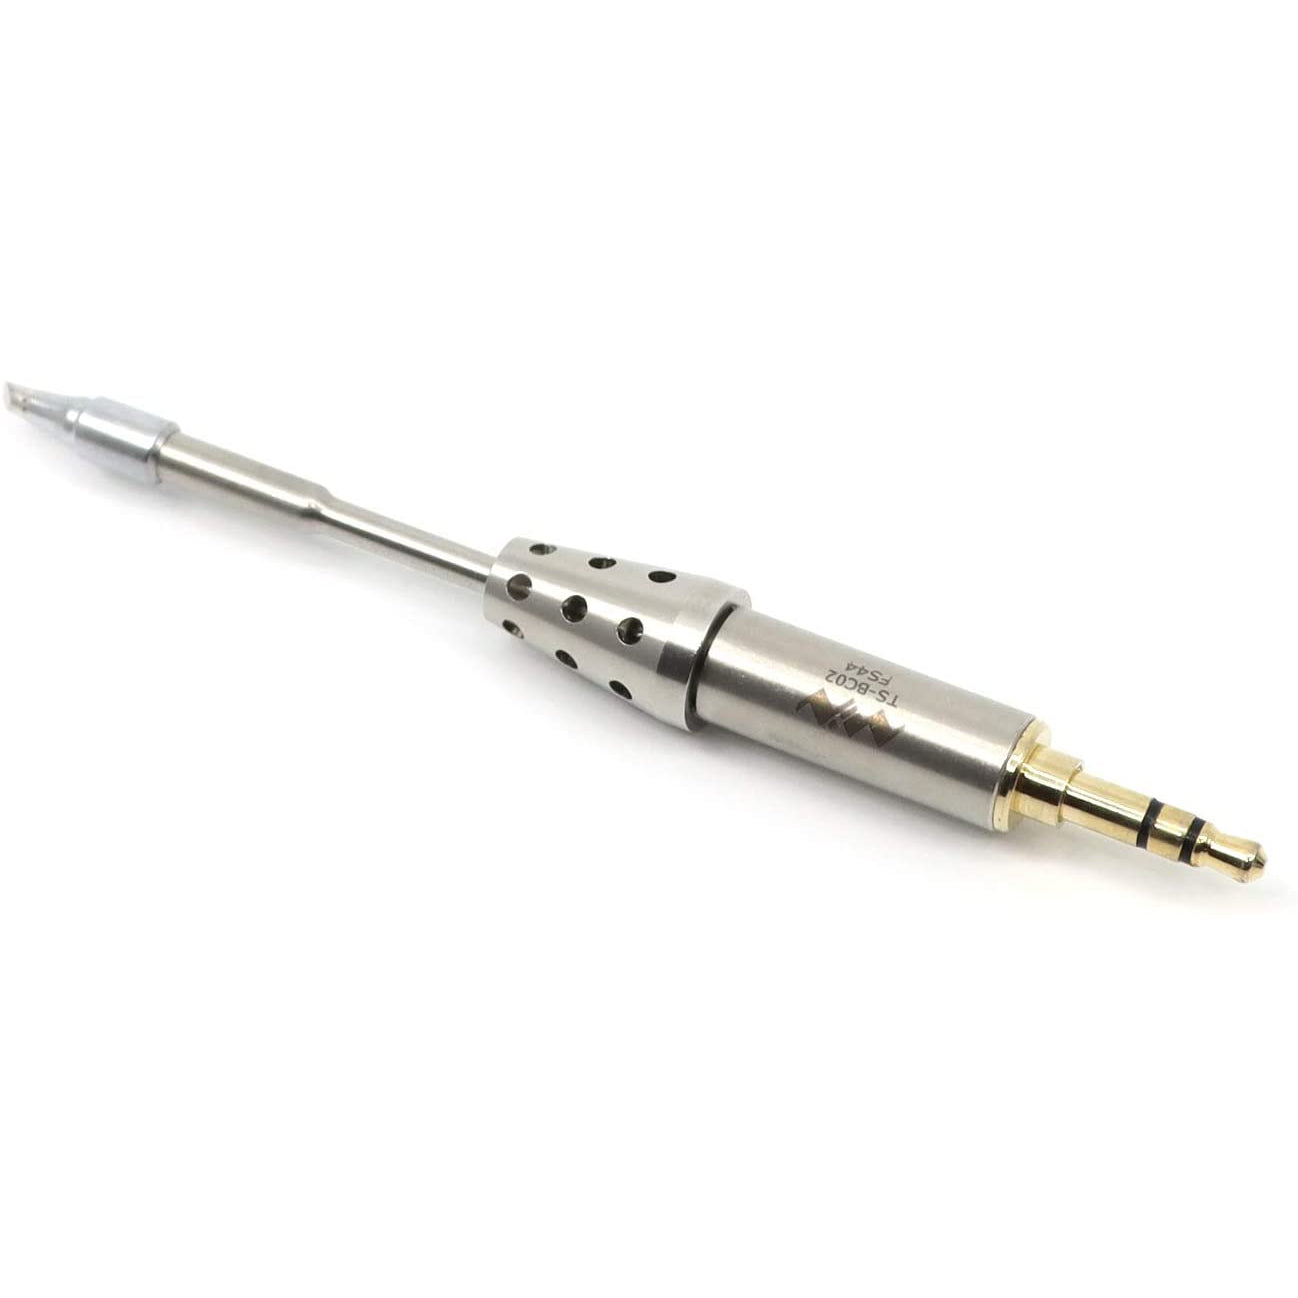 Miniware TS-BC02 Soldering Tip for TS80 Soldering Iron-Miniware-K and A Electronics